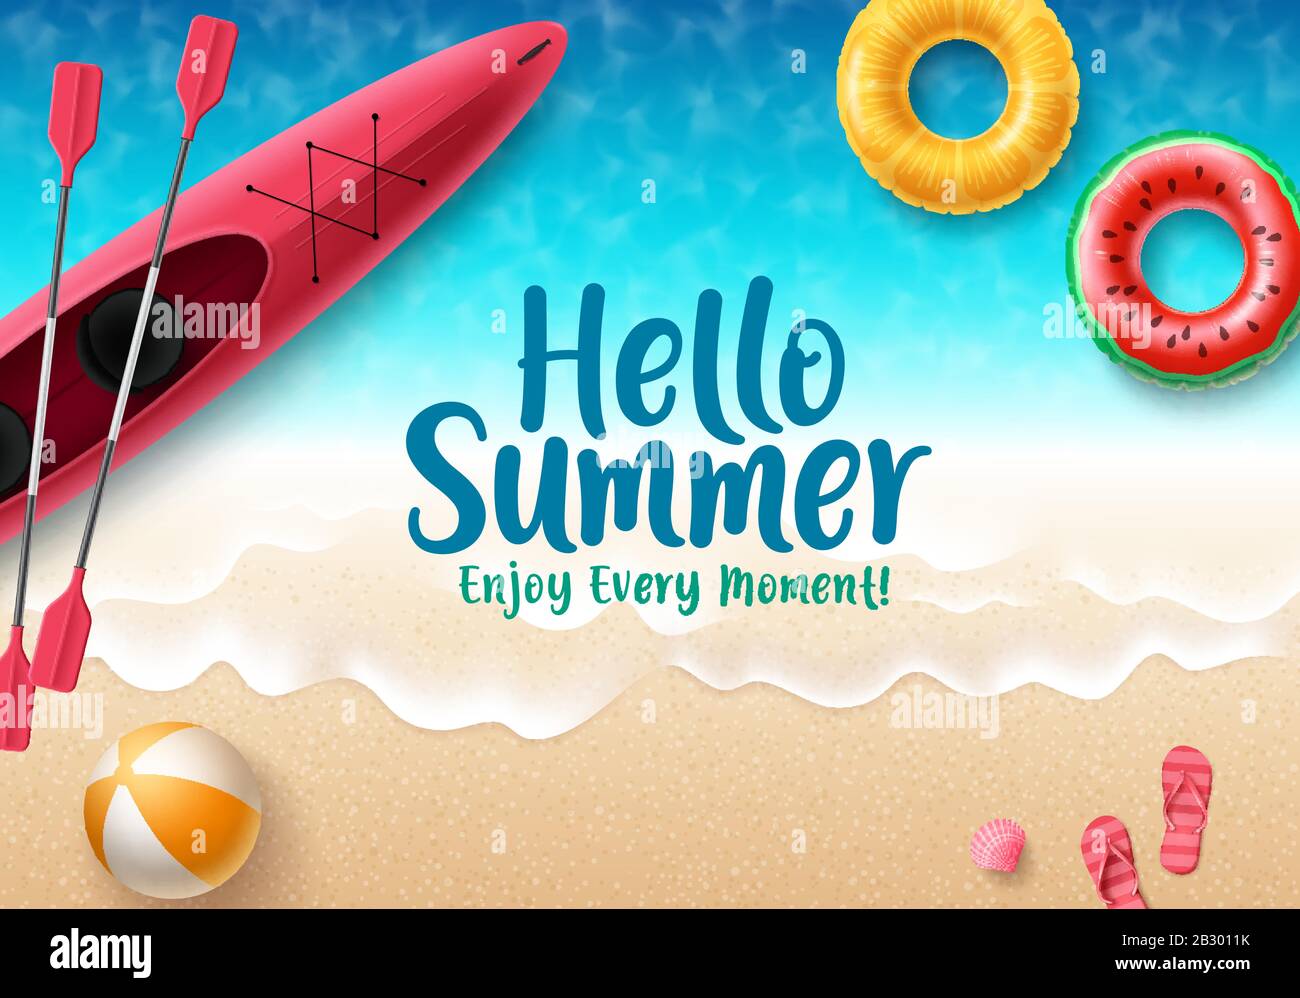 Hello summer vector banner design. Hello summer text with colorful beach elements like beach ball, flipflop, floaters and kayak in seaside background Stock Vector